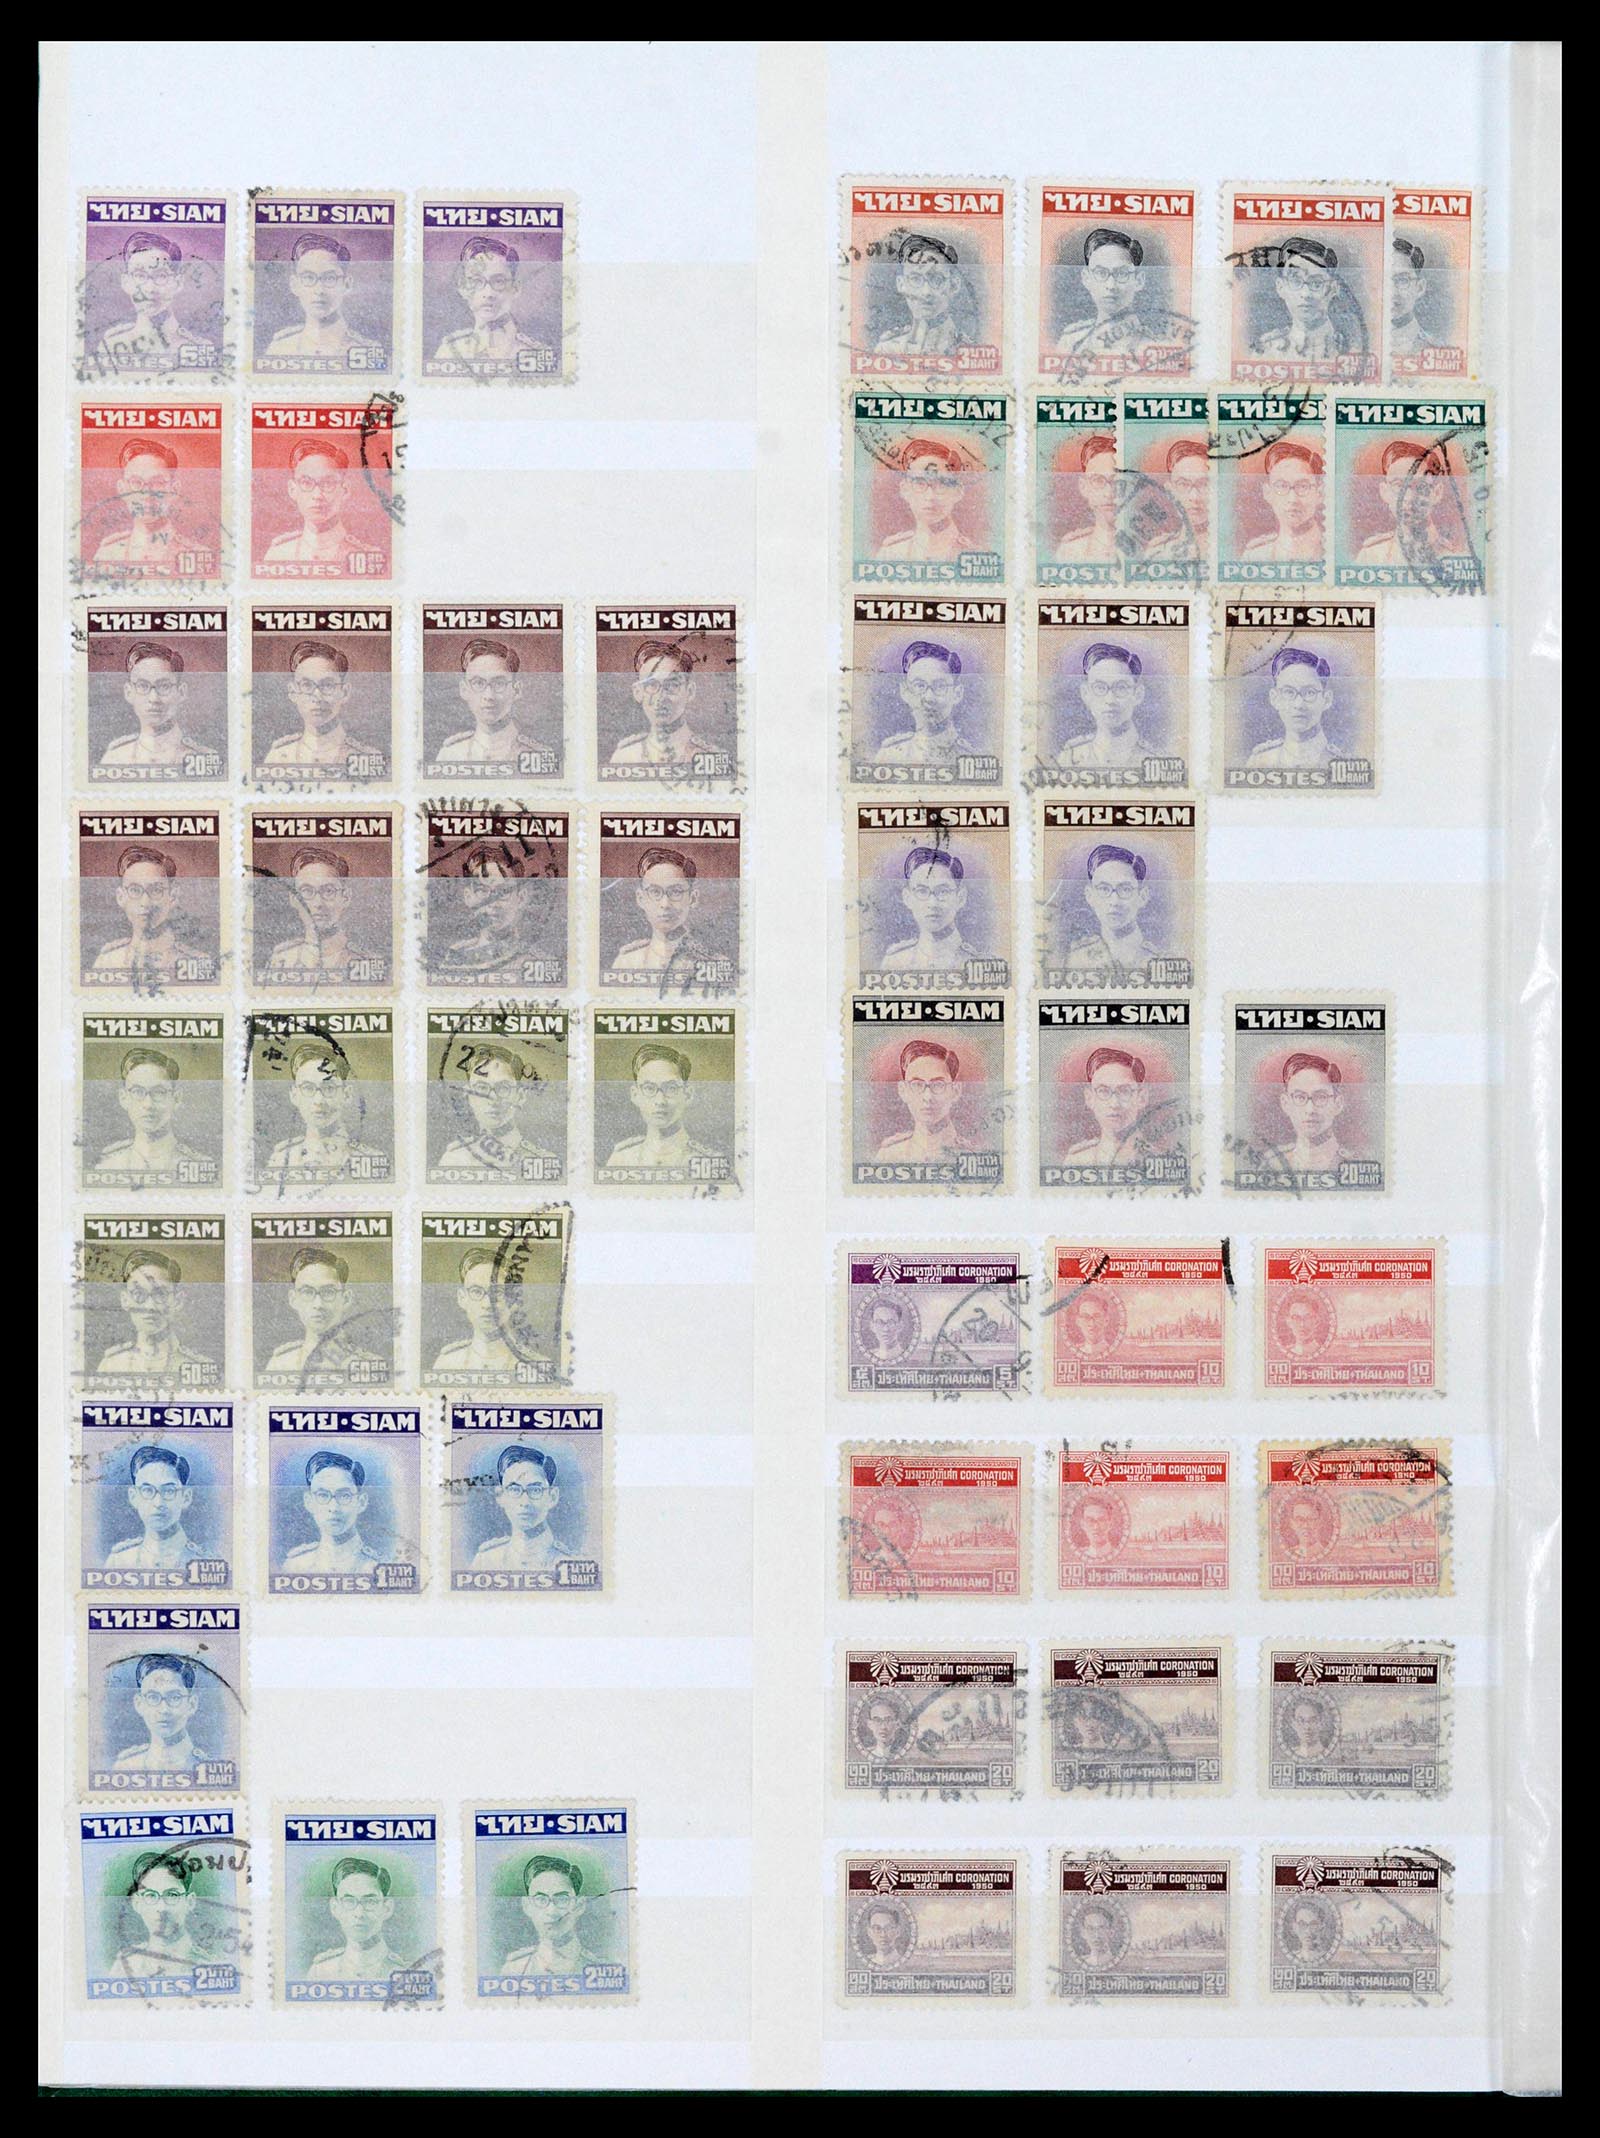 39384 0018 - Stamp collection 39384 Thailand 1883-2014.